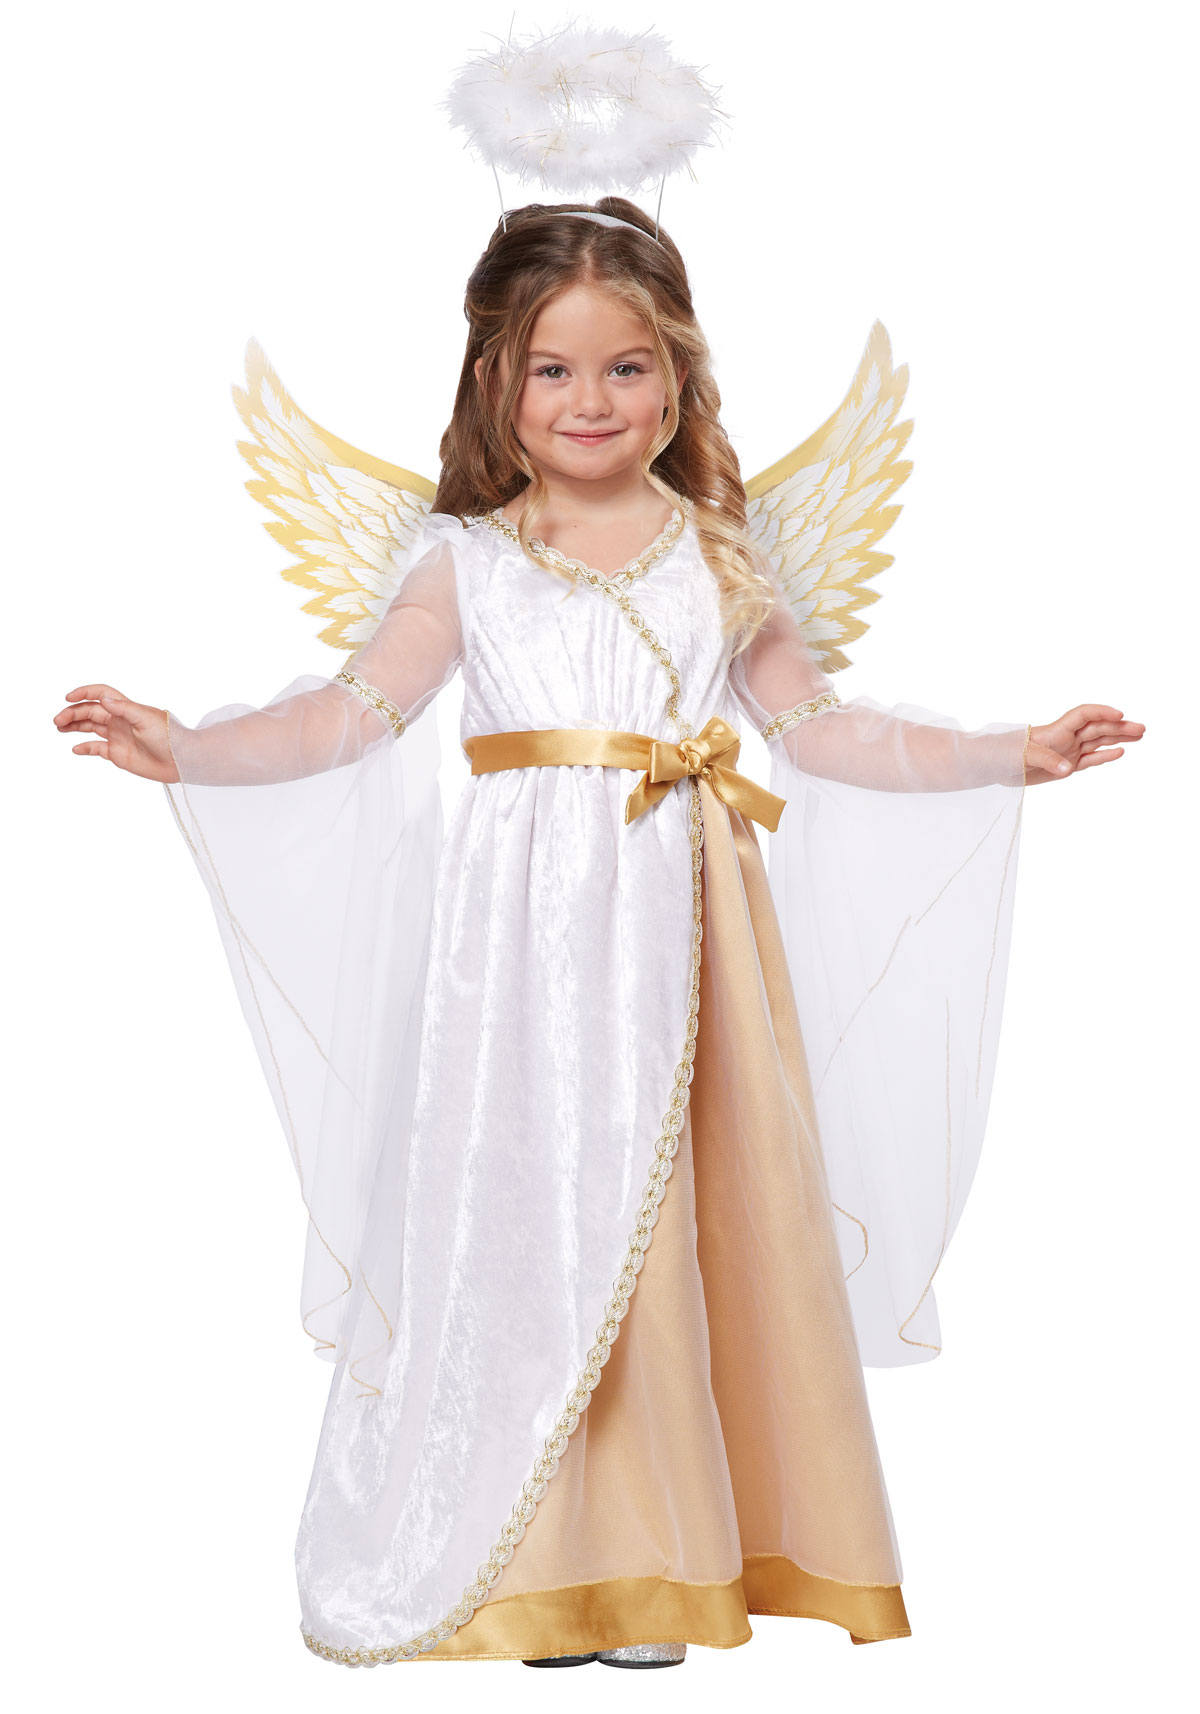 CALIFORNIA COSTUME COLLECTIONS Sweet Little Angel - White/Gold